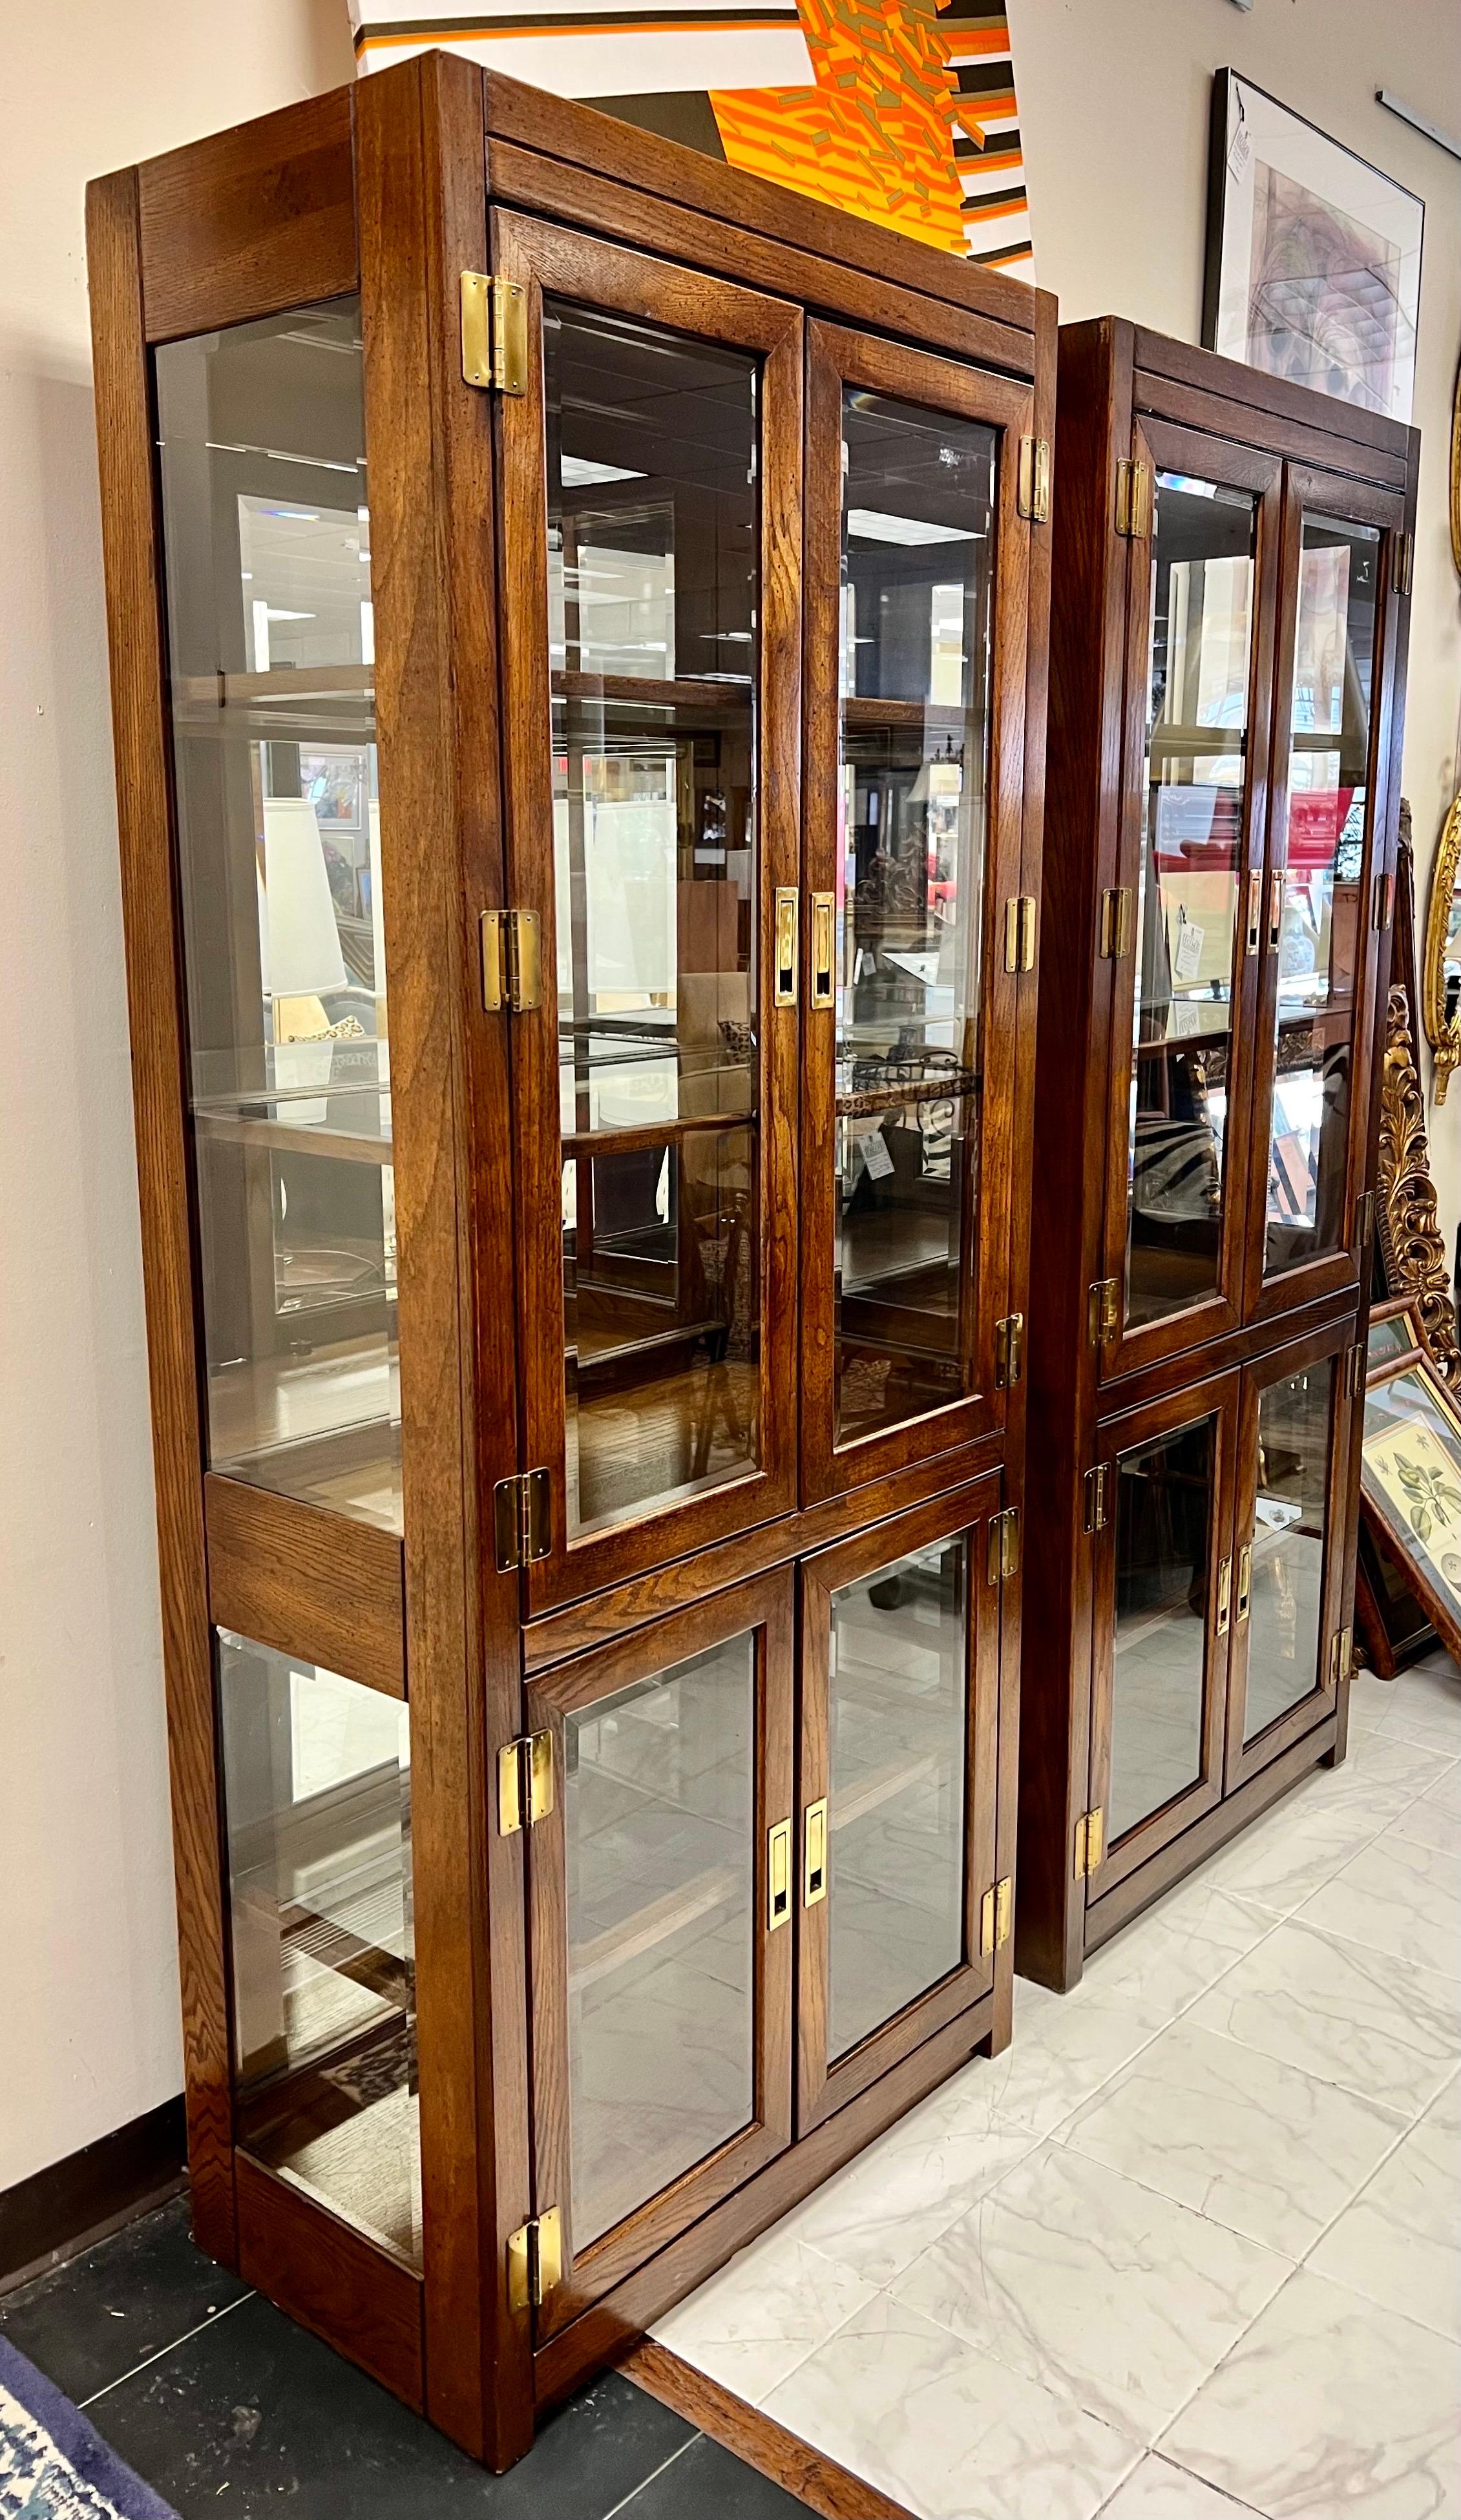 Coveted pair of Mid-Century Modern vitrines that feature doors art top and bottom. All original. Although they are electrified the lighting has not been tested and we do see a loose wire - again, not an issue an electrician couldn't fix if needed.